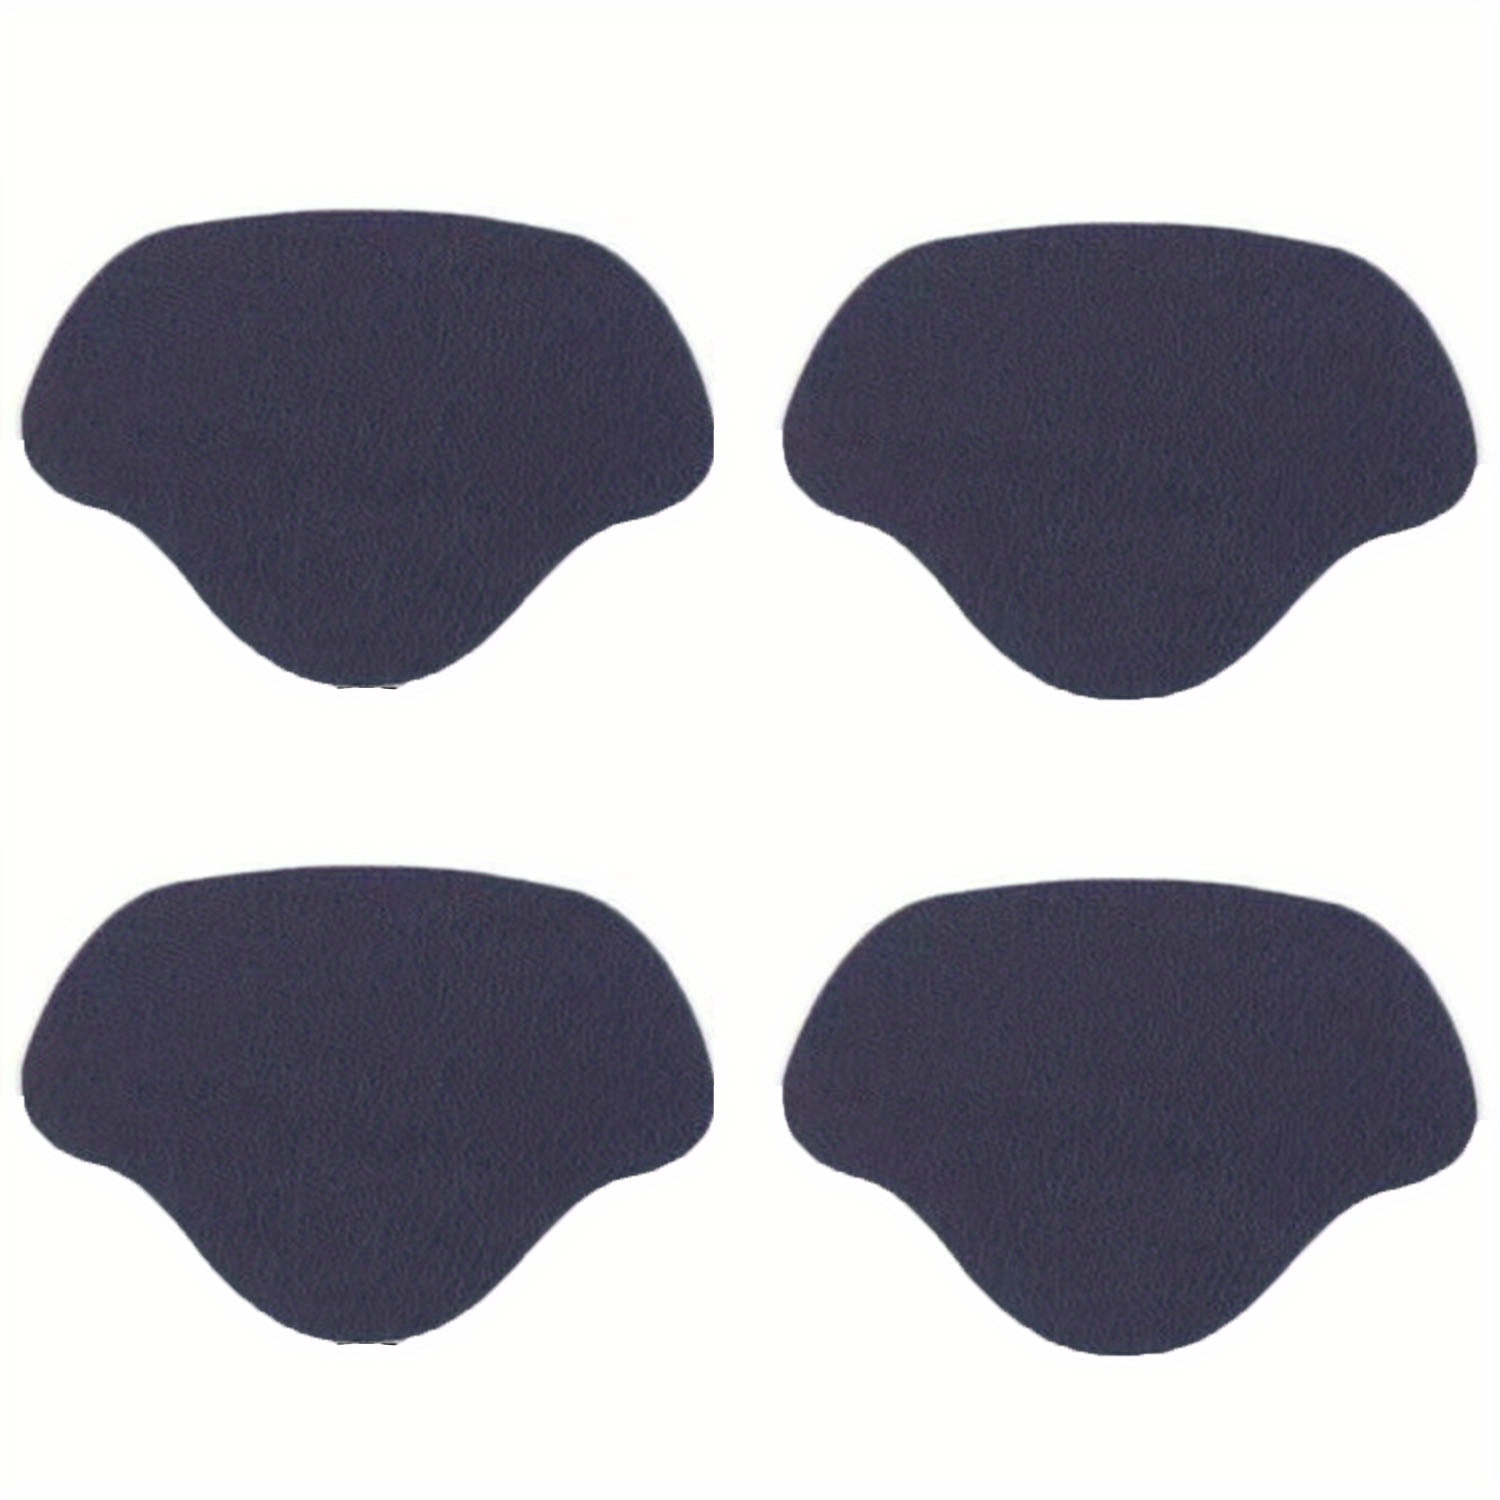 Shoe Patch Repair Patches for Shoe Hole Prevention Heel Stickers